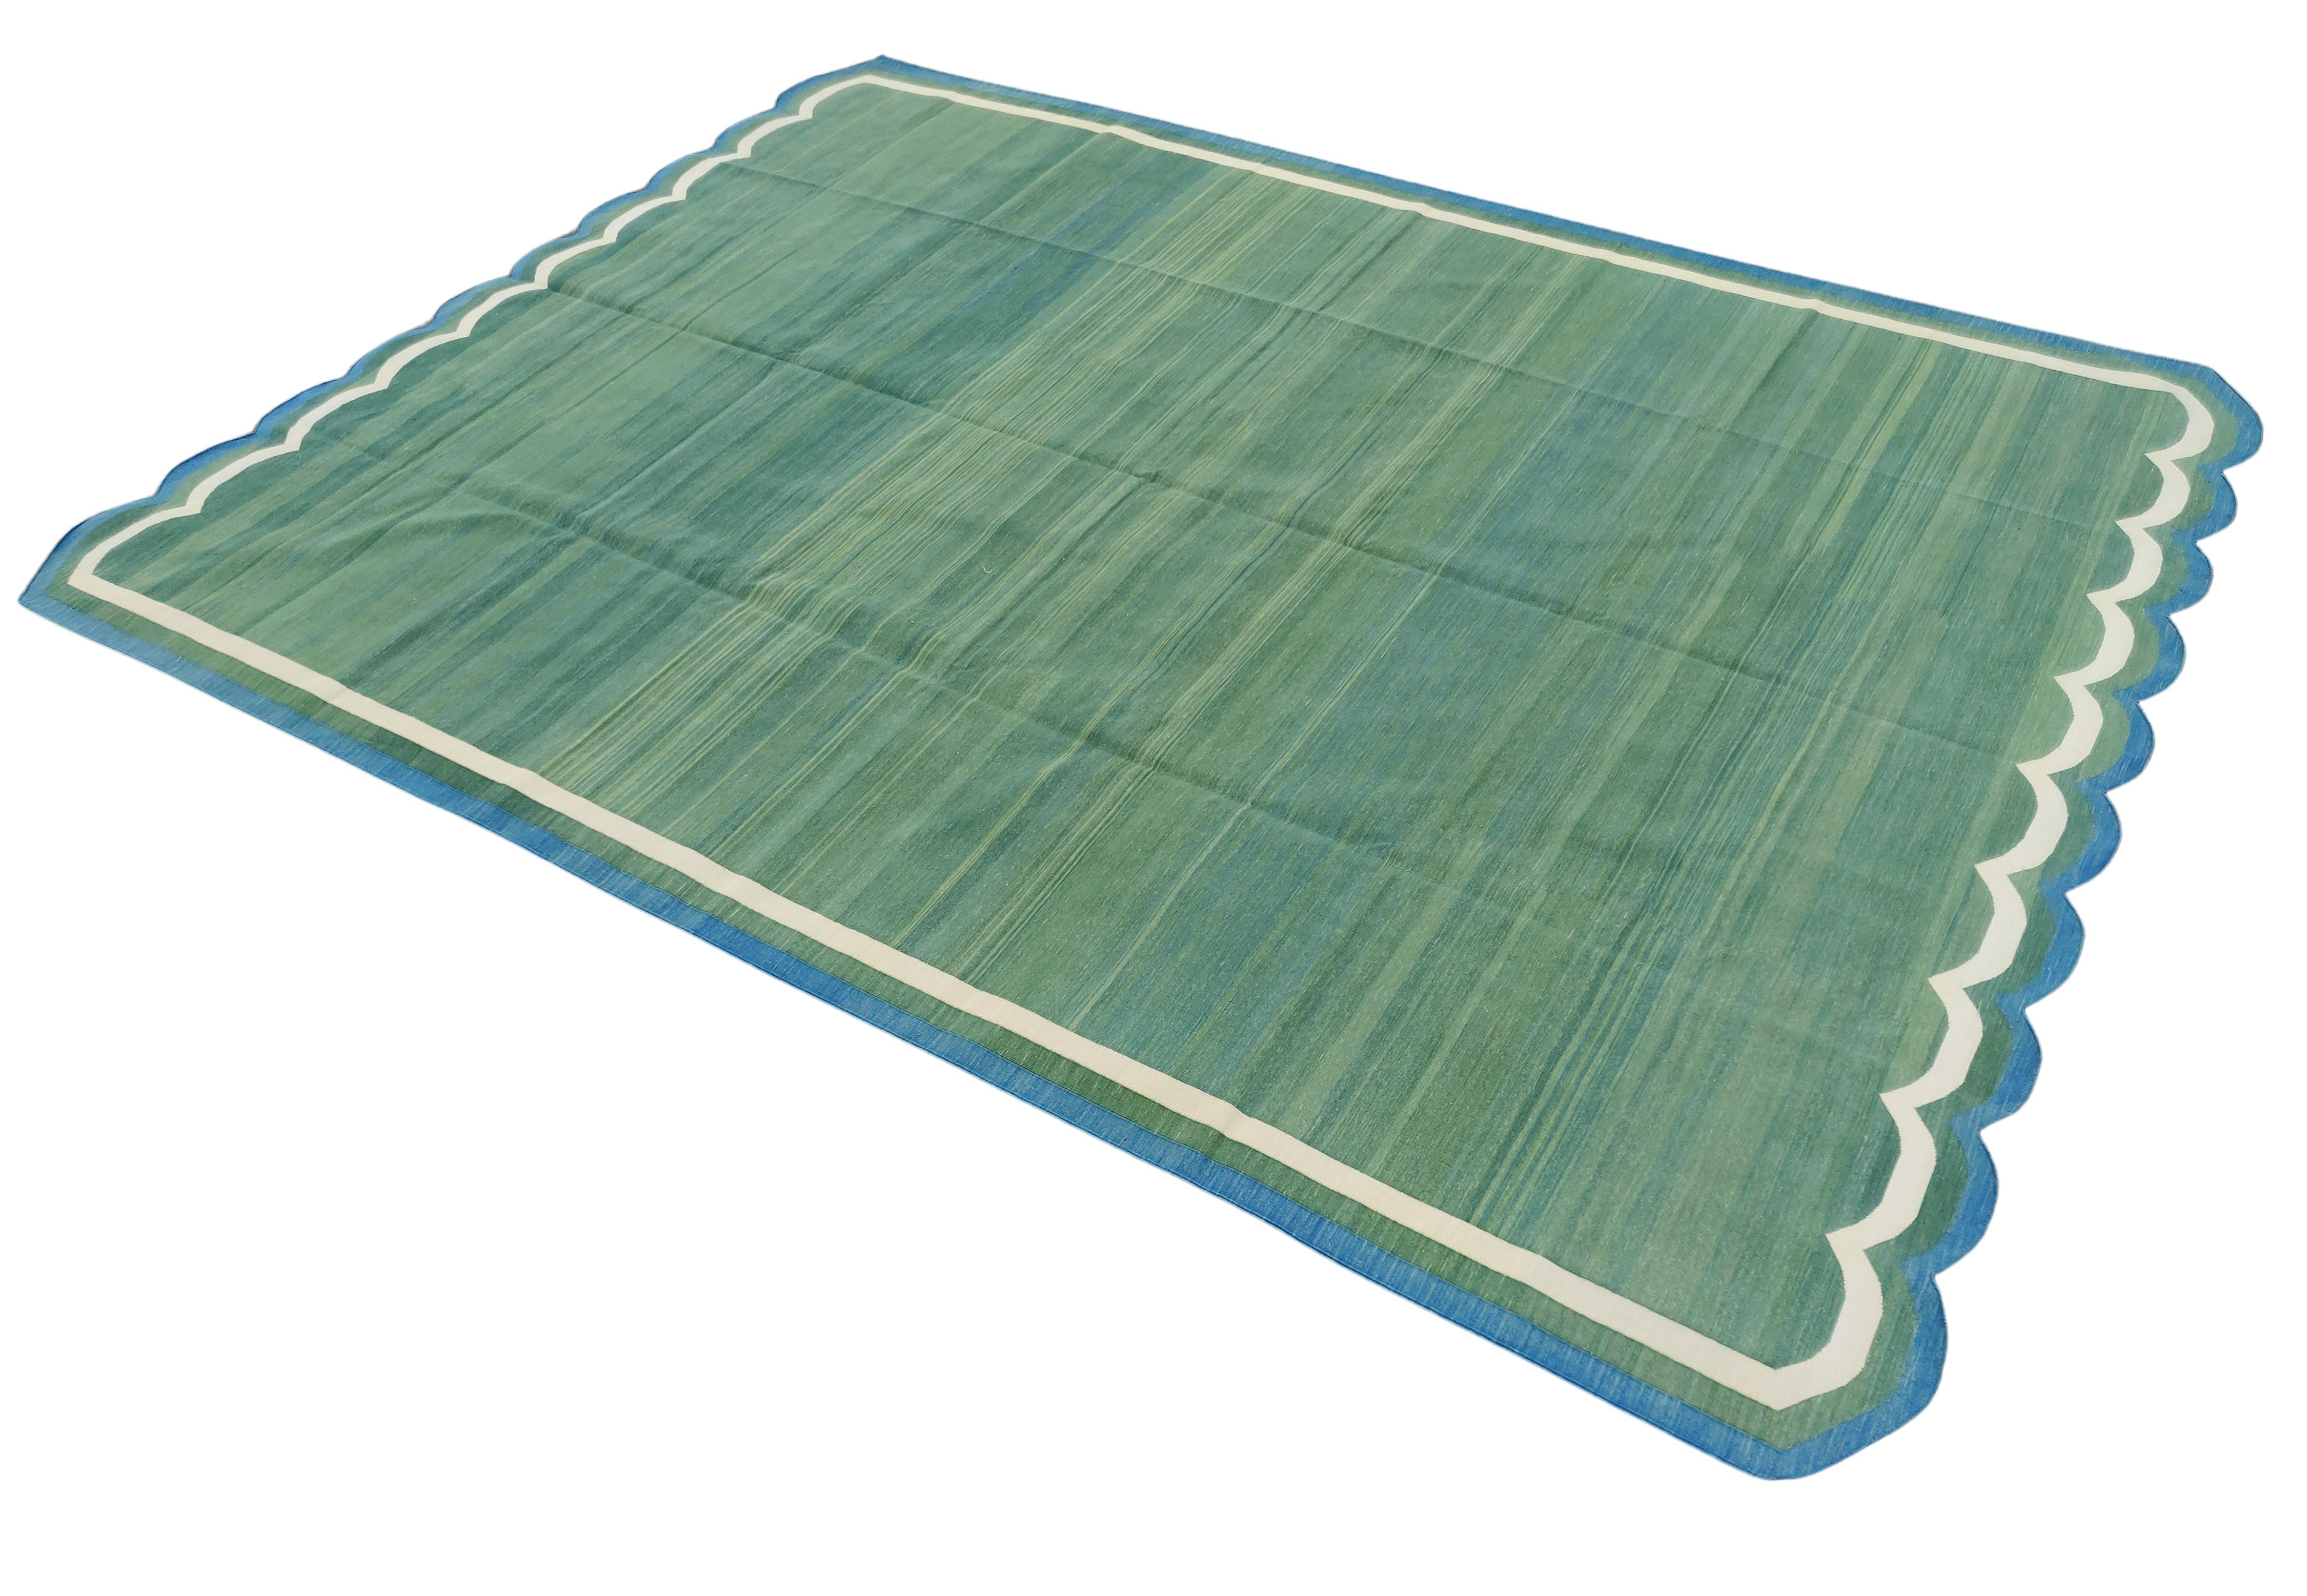 Mid-Century Modern Handmade Cotton Area Flat Weave Rug, 10x14 Green And Blue Scallop Kilim Dhurrie For Sale